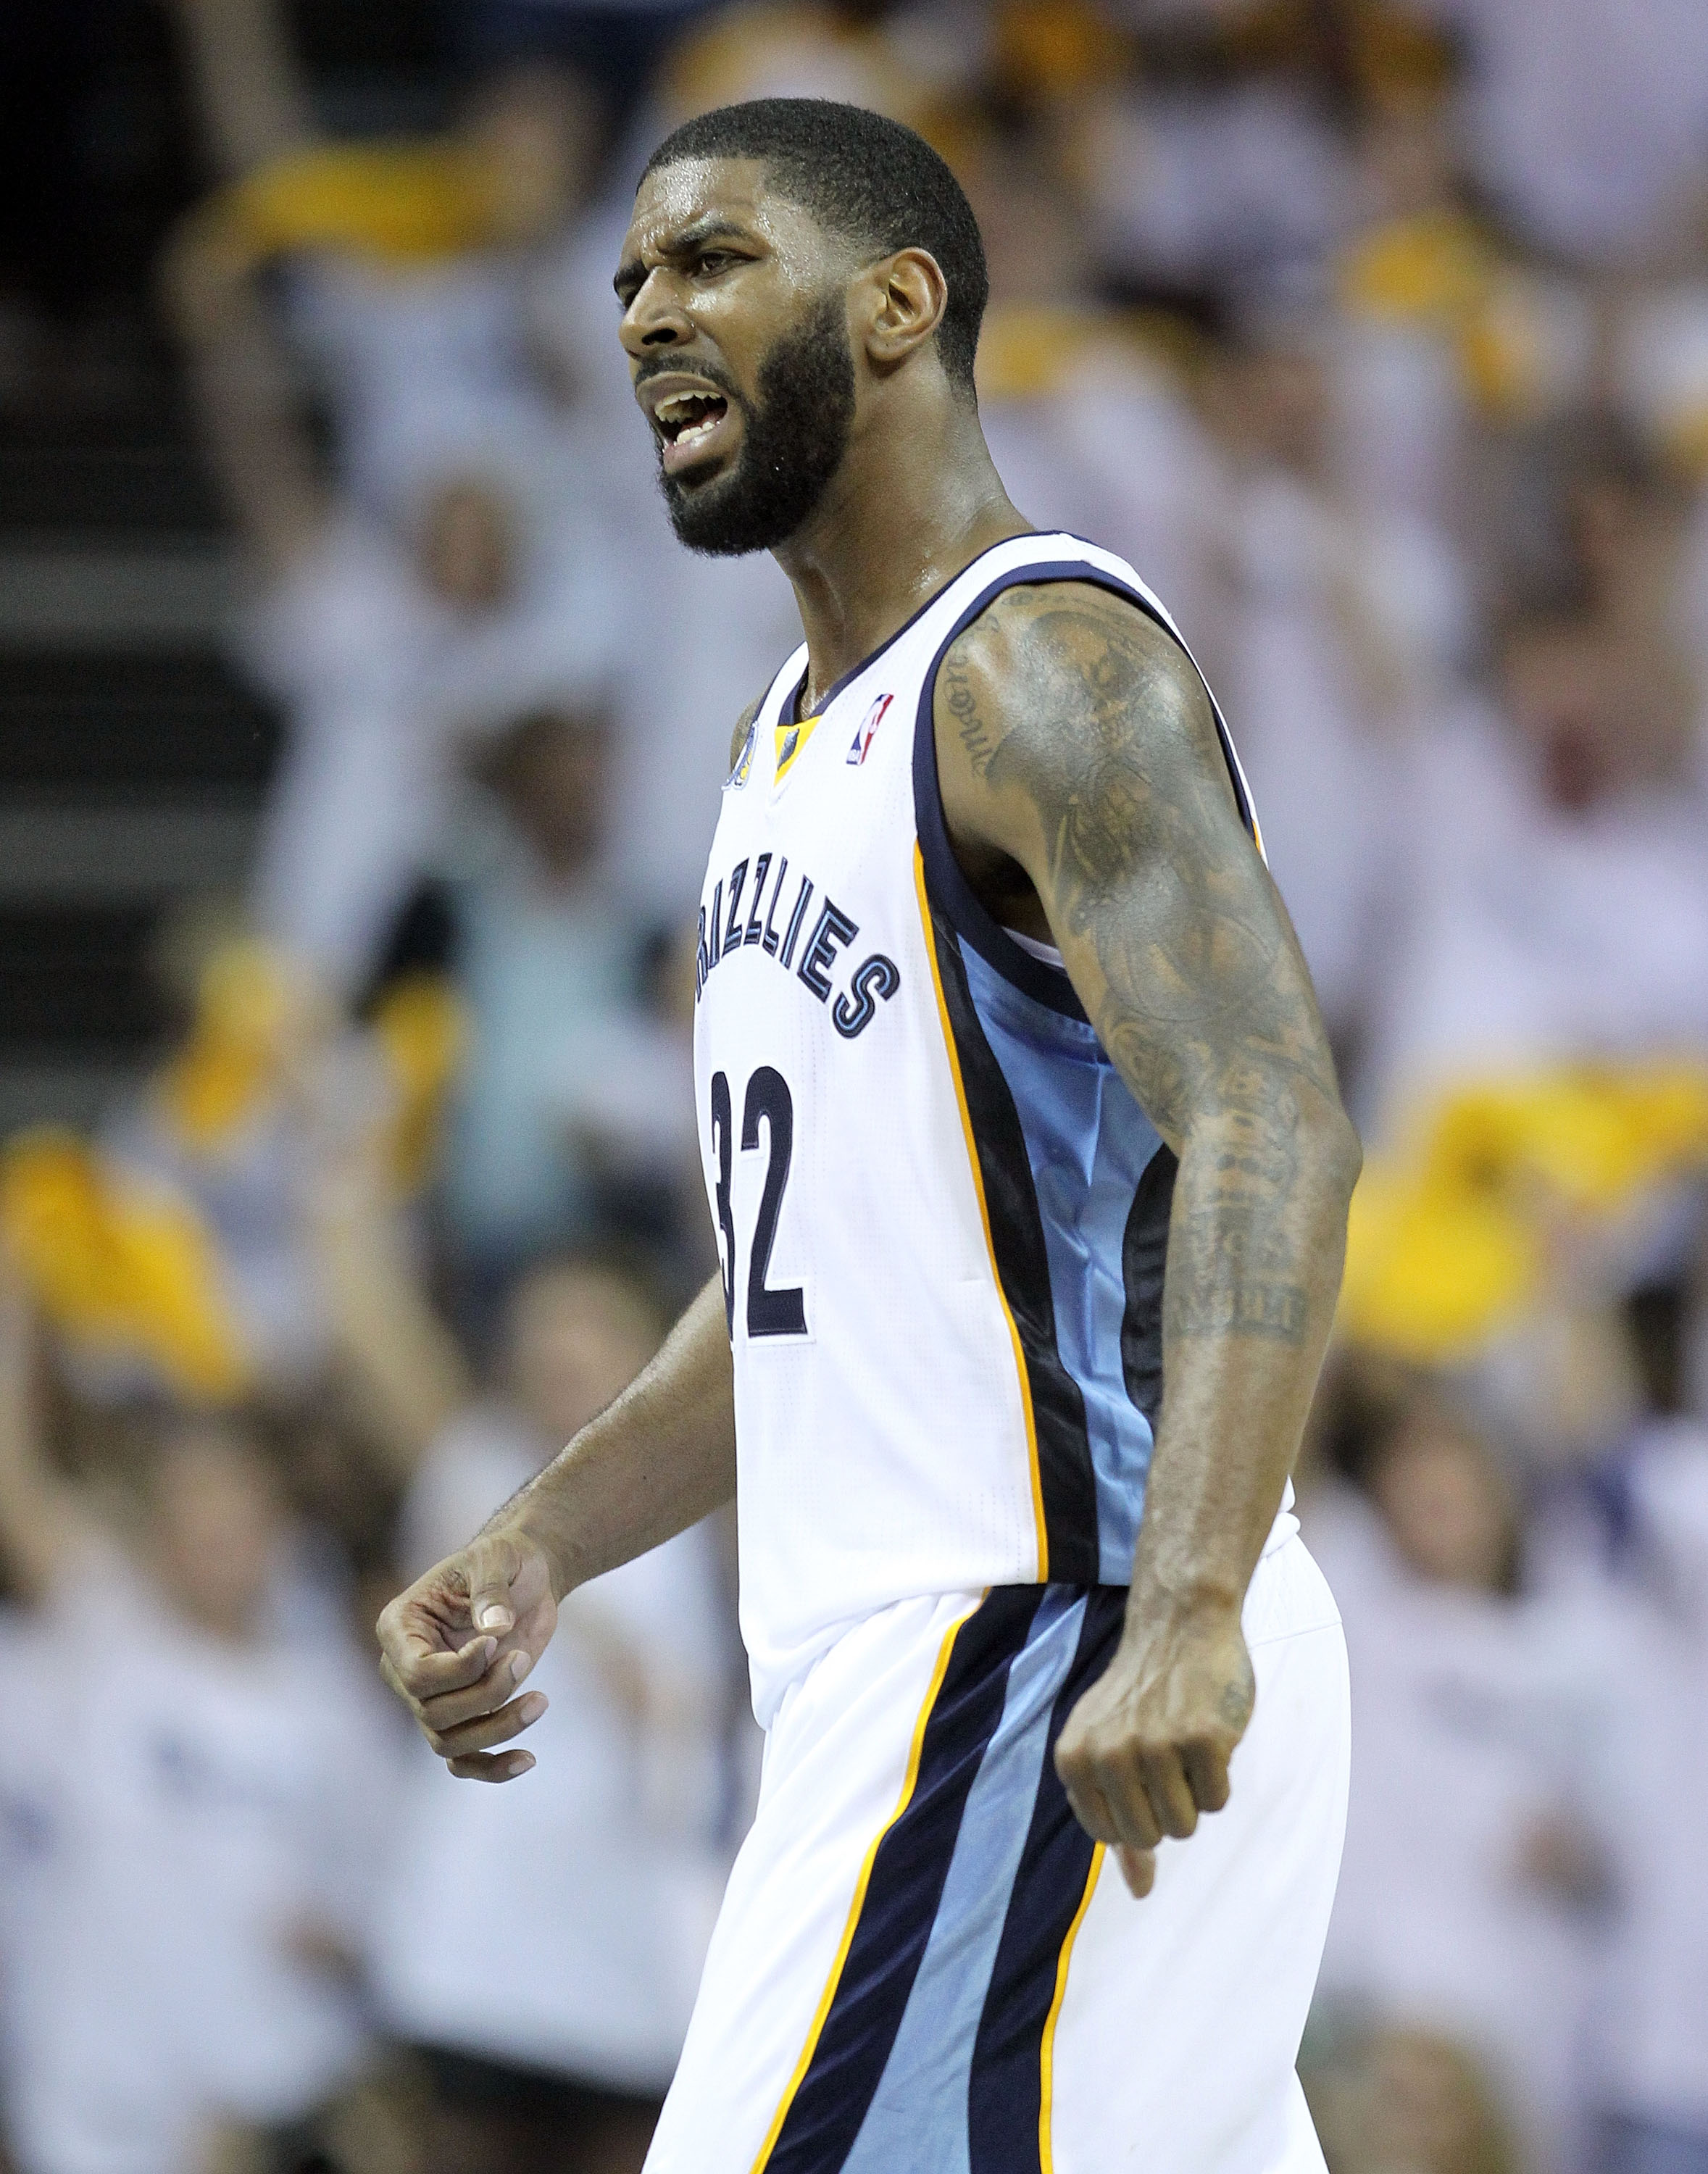 MEMPHIS, TN - MAY 07:  O.J. Mayo #32 of the  Memphis Grizzlies celebrates during the game against the Oklahoma City Thunder in Game Three of the Western Conference Semifinals in the 2011 NBA Playoffs at FedExForum on May 7, 2011 in Memphis, Tennessee.The